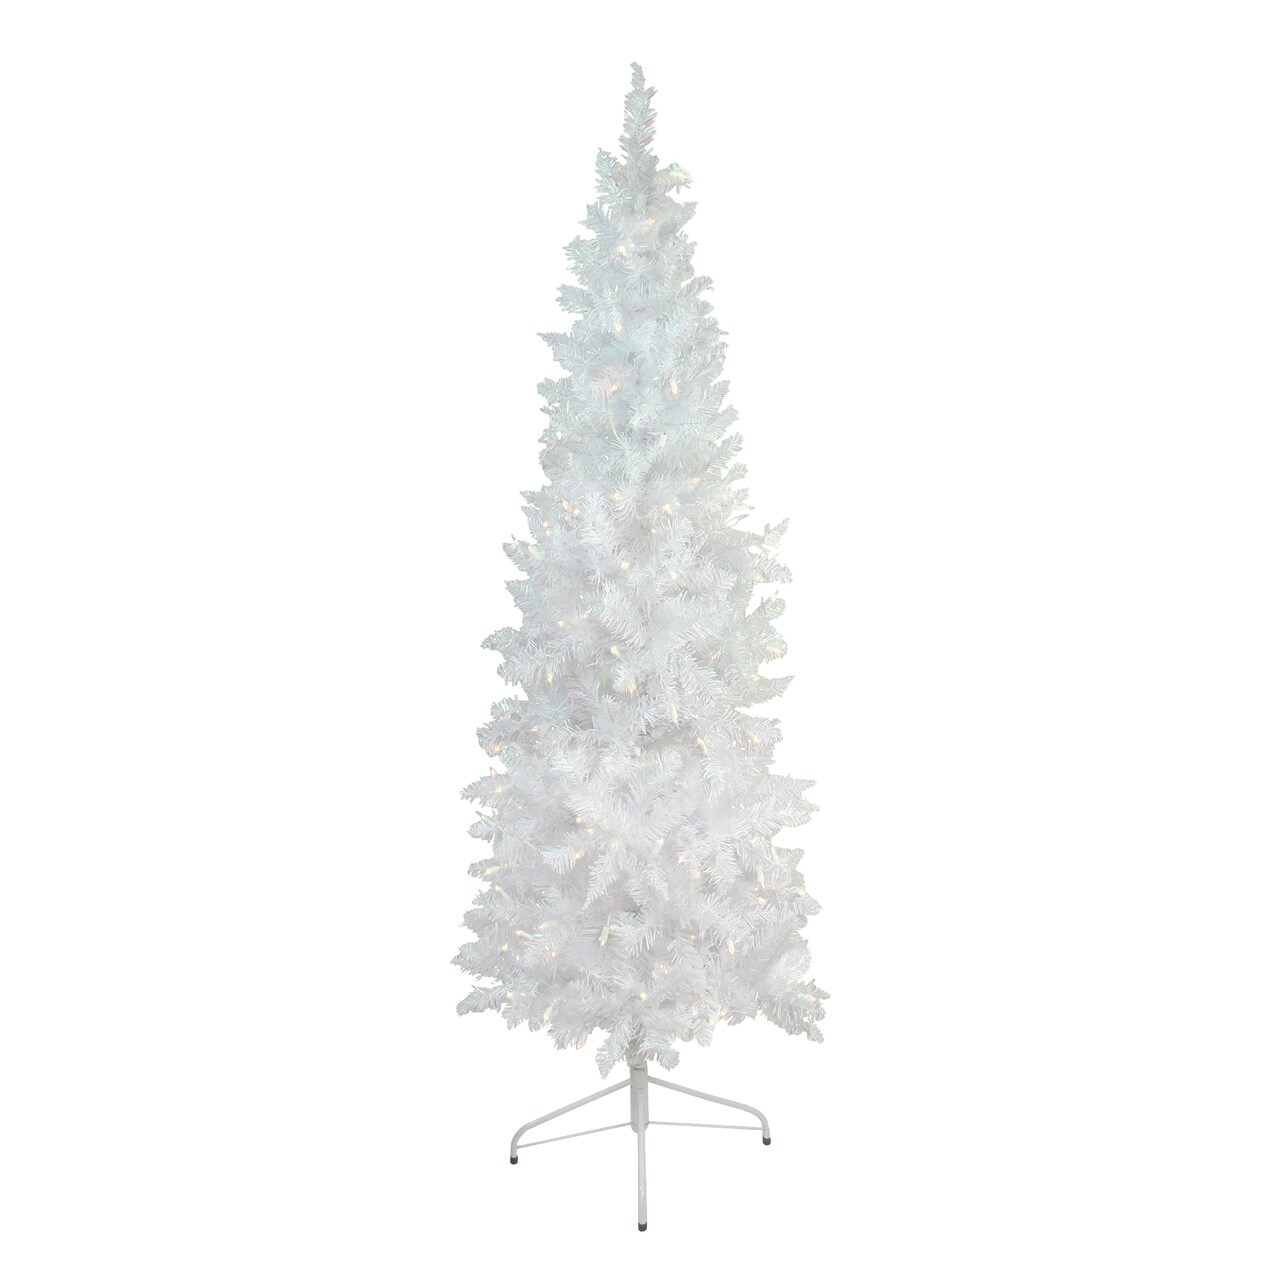 Northlight 6' Pre-Lit Glimmer Iridescent Spruce Artificial Christmas Tree -  Clear AlwaysLit Lights